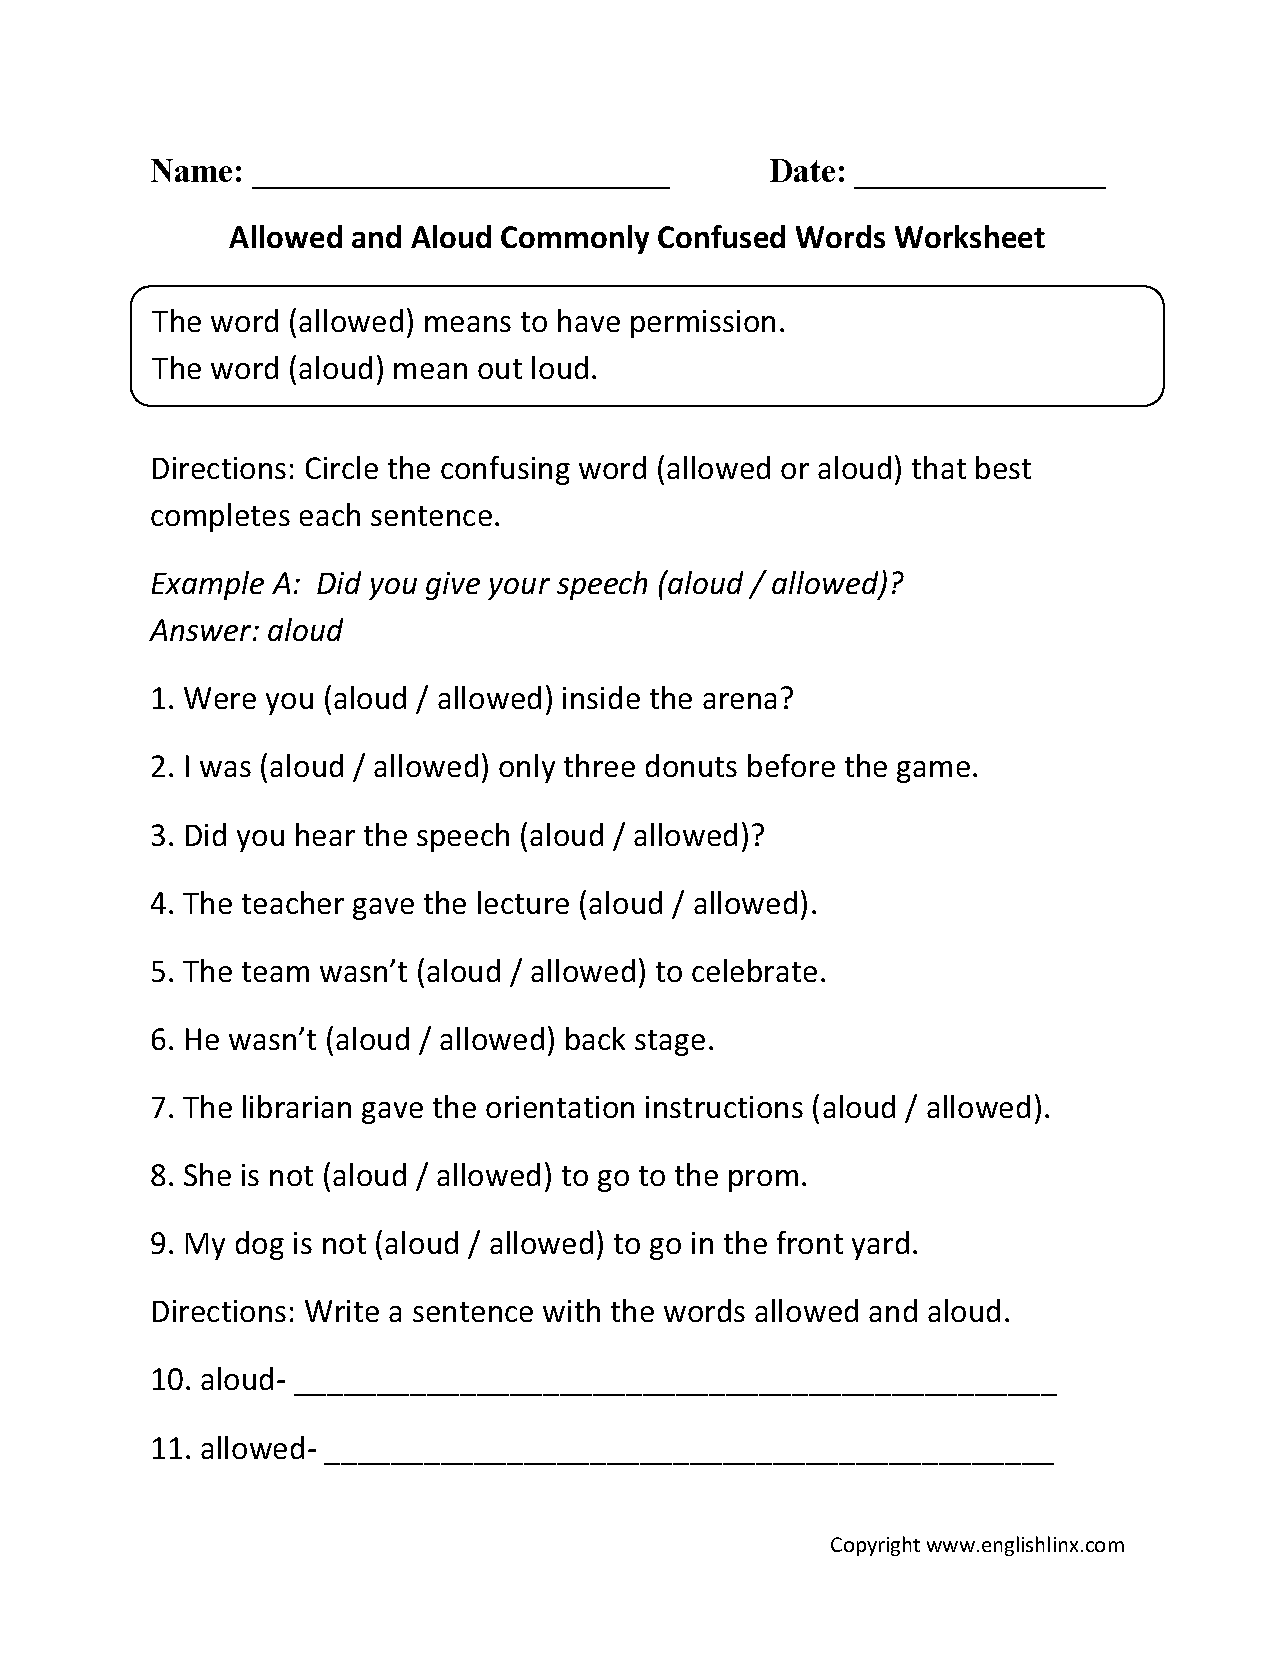 Allowed and Aloud Commonly Confused Words Worksheets